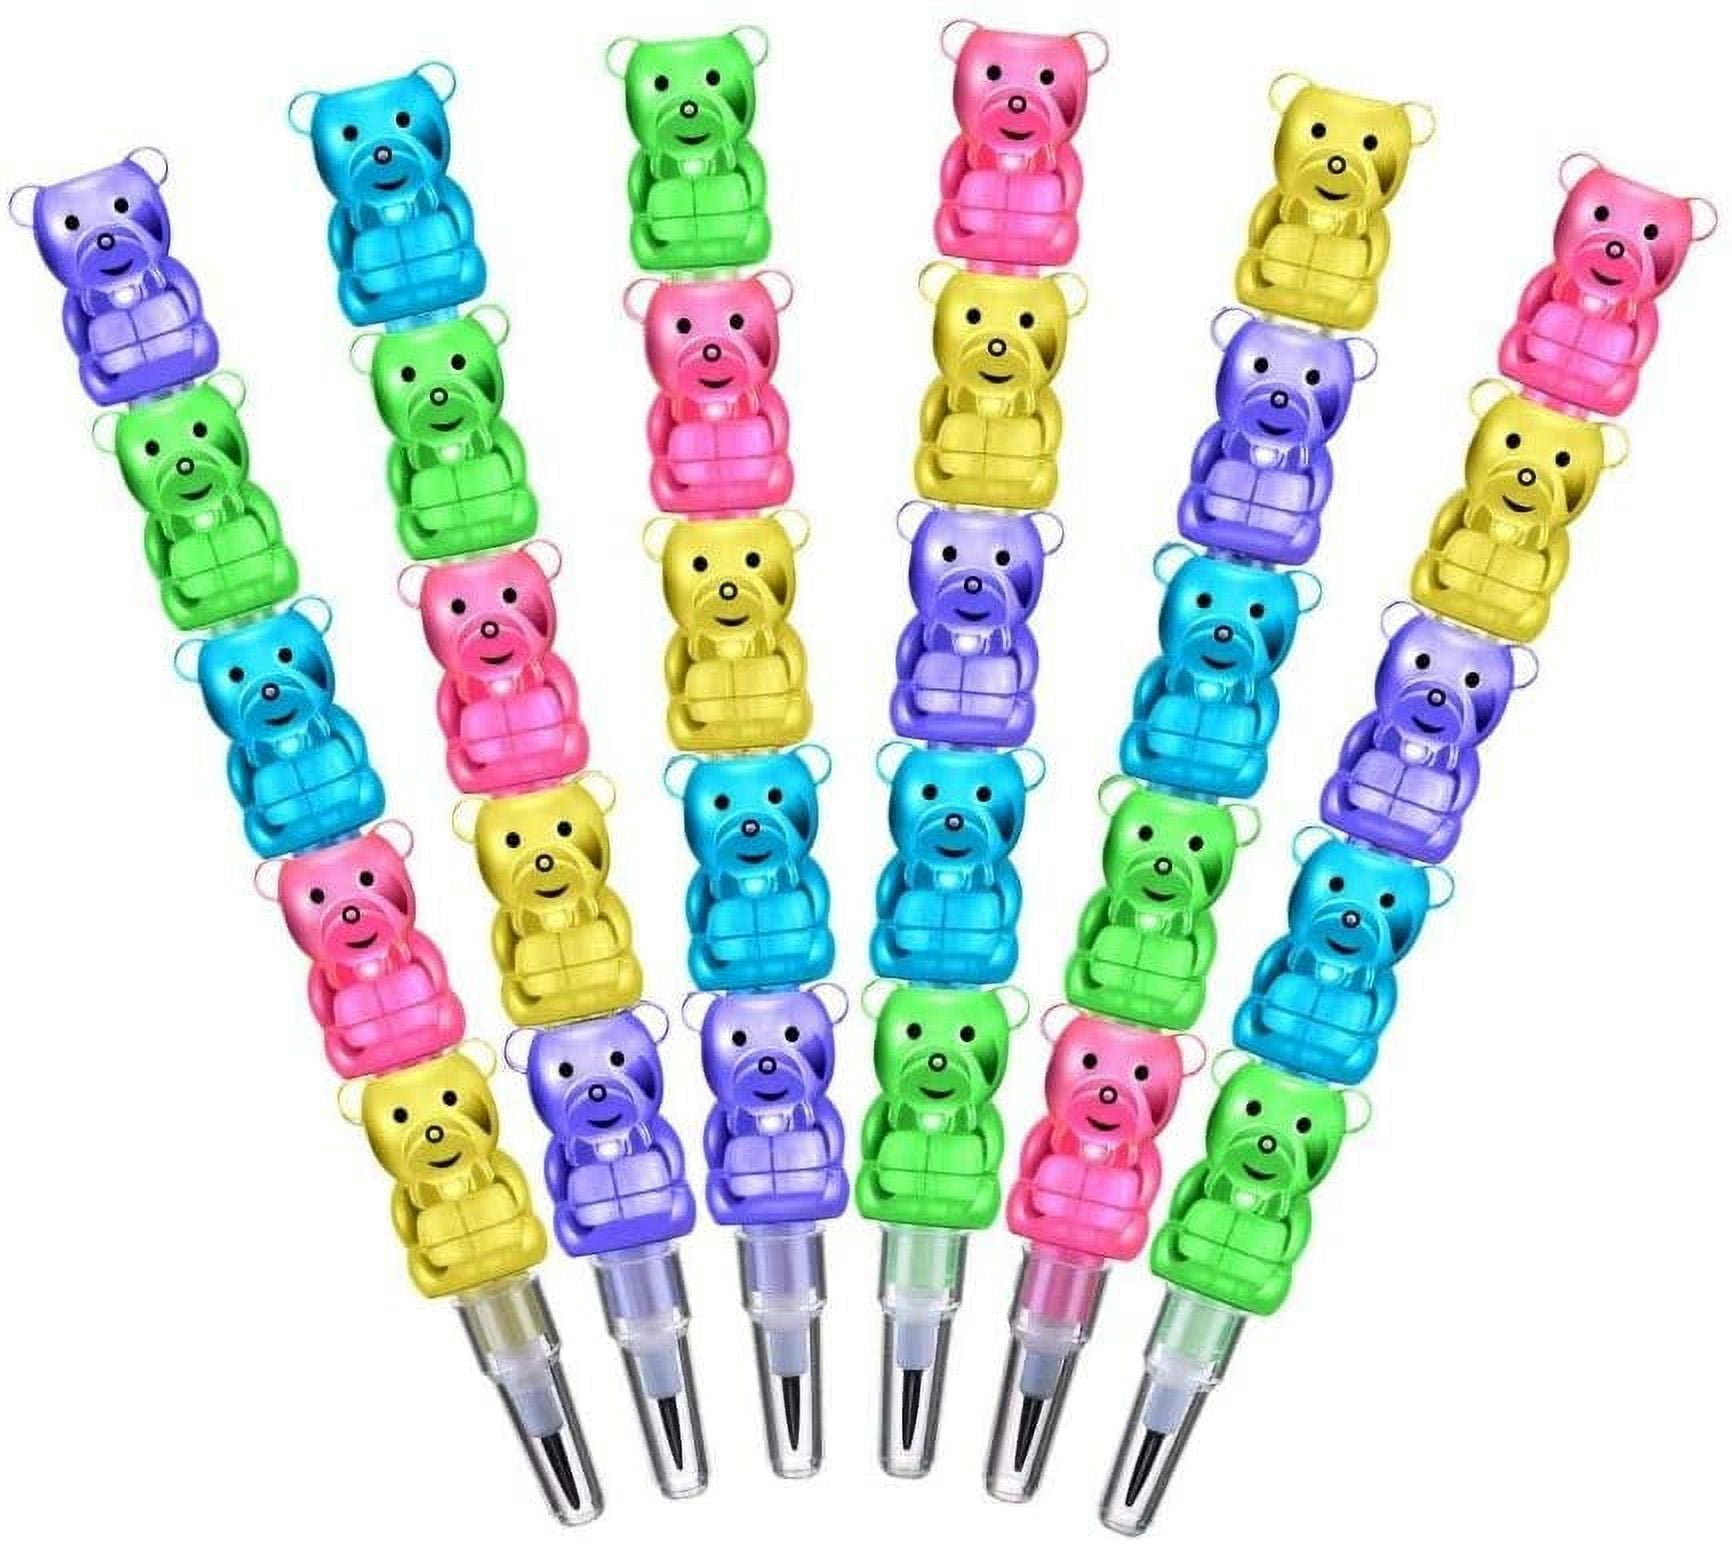  STOBOK 120 Pcs Five Section Bear Pencil Smelly Markers for Kids  Smelly Pencils Writing Pencil Color Pencil Party Favors Bear Pencils  Cartoon Pencil Lead Student Bulk School Supplies : 辦公用品